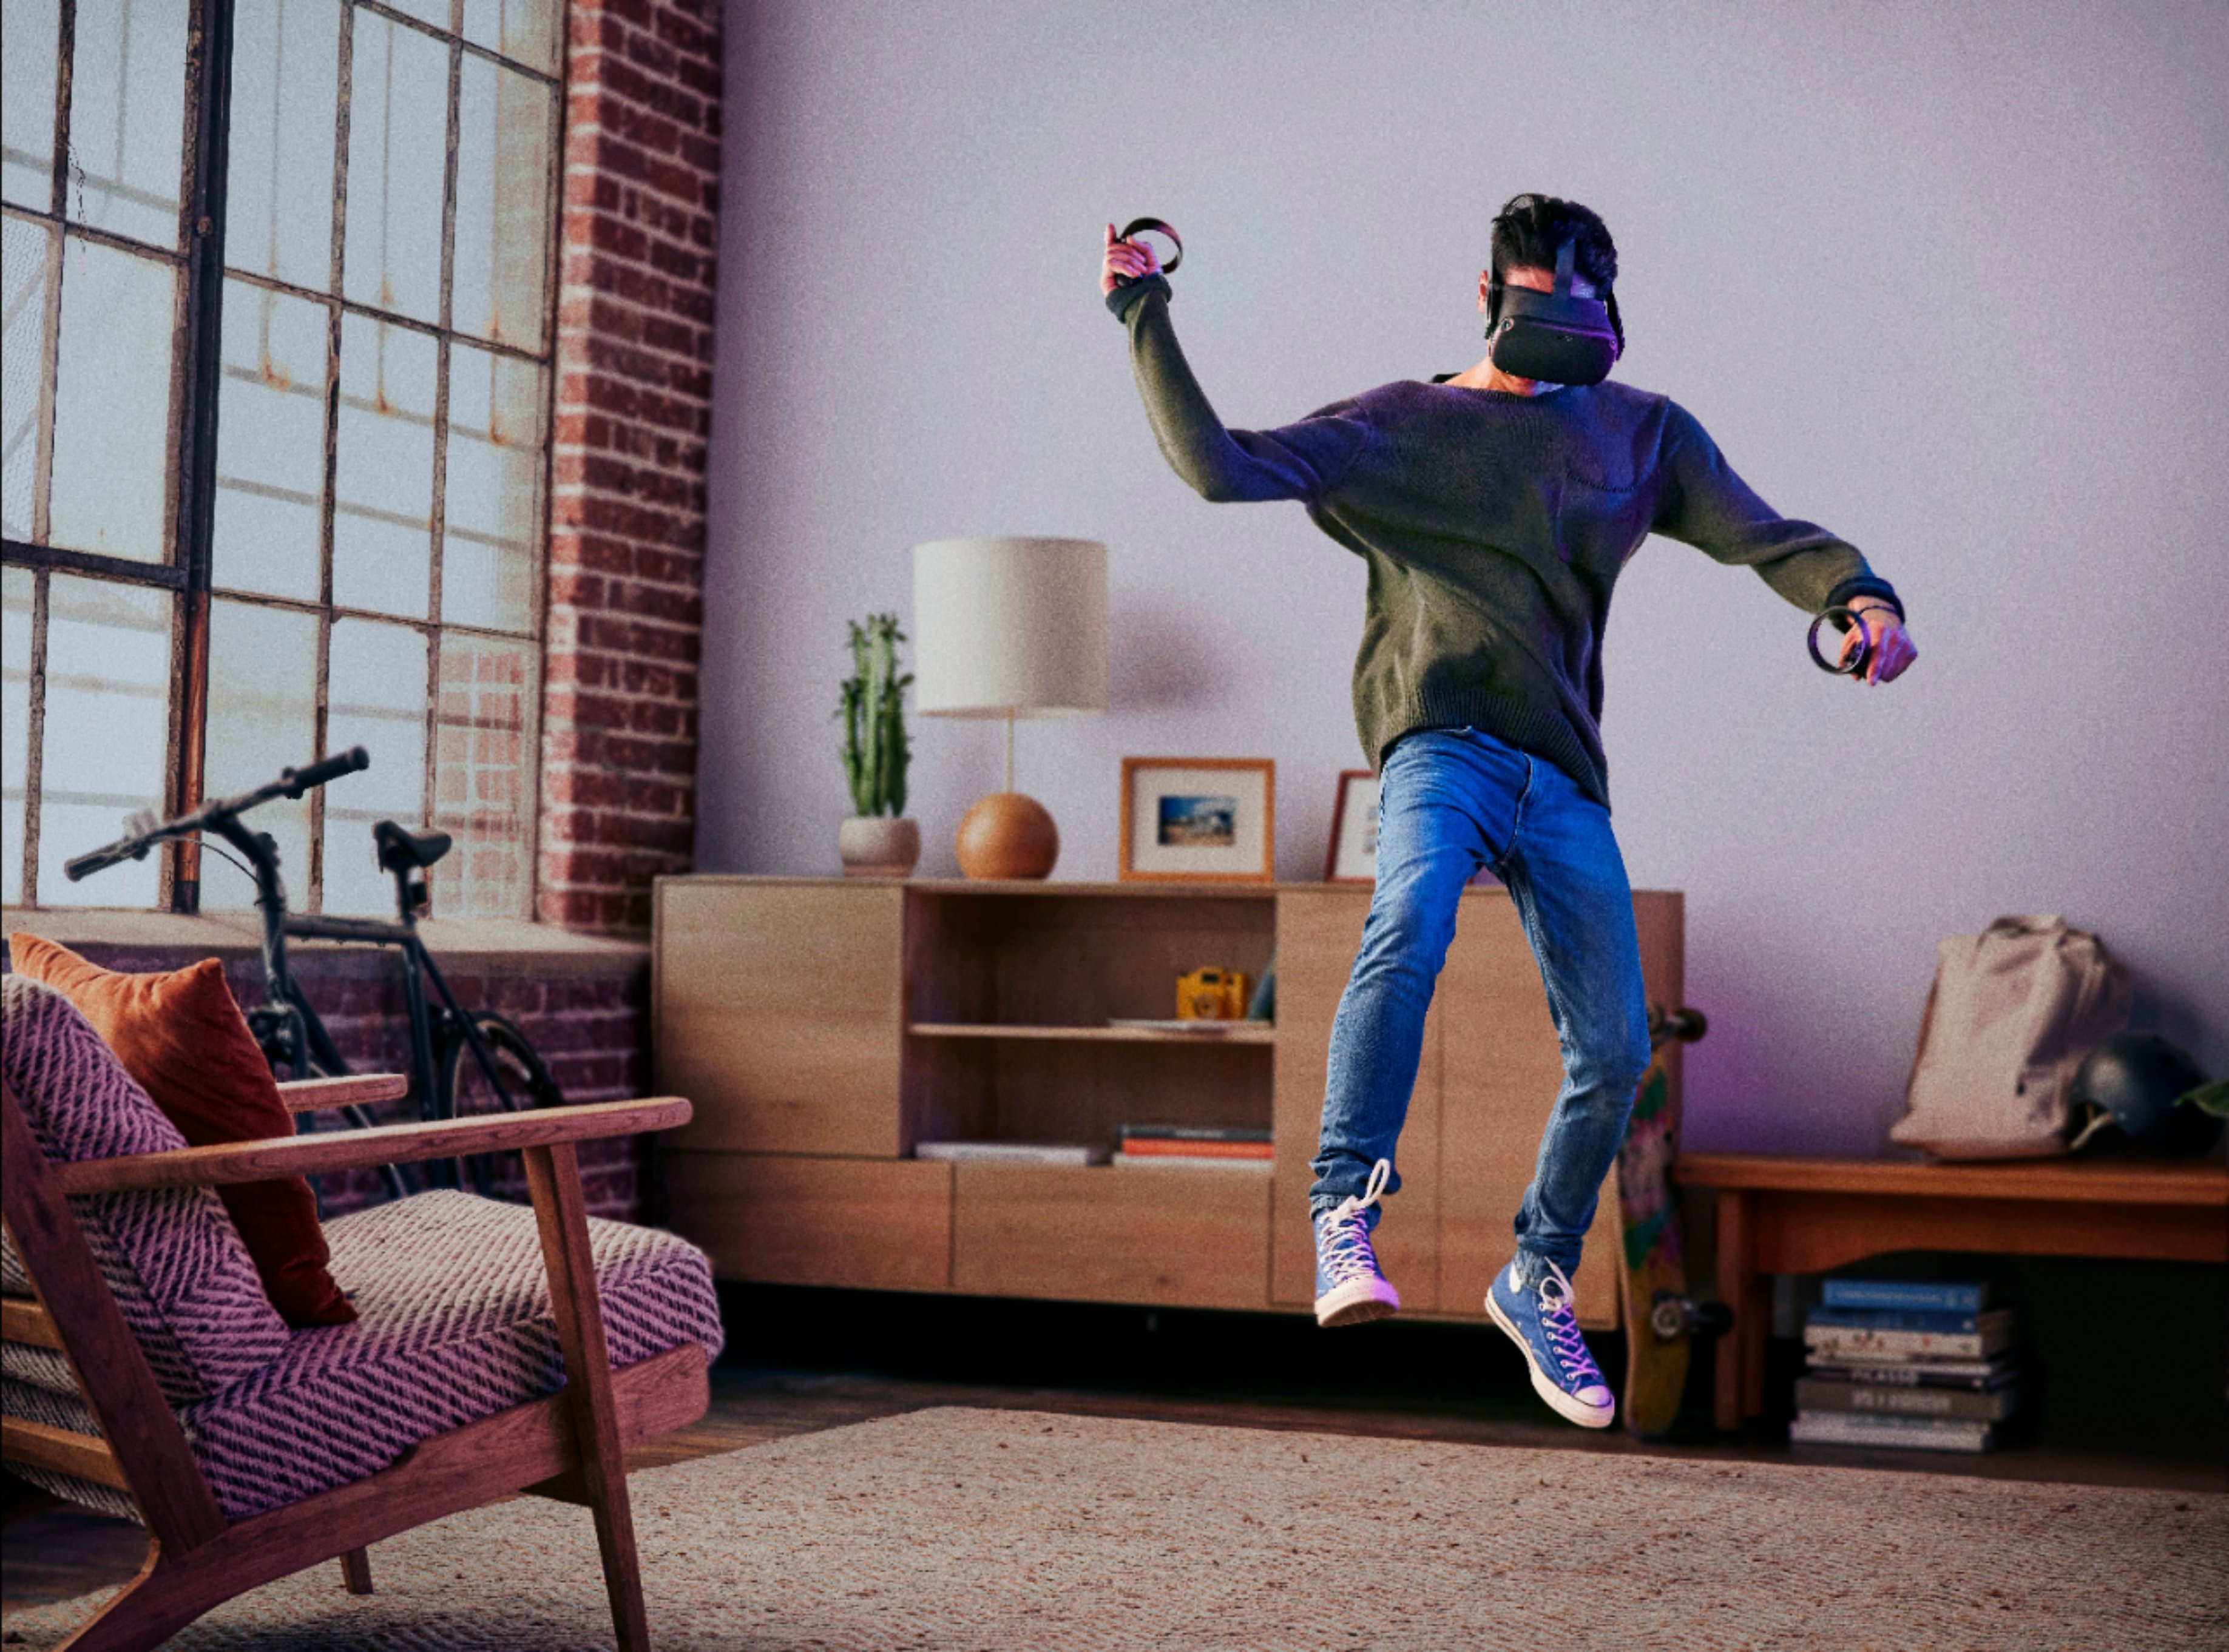 oculus quest all in one gaming headset